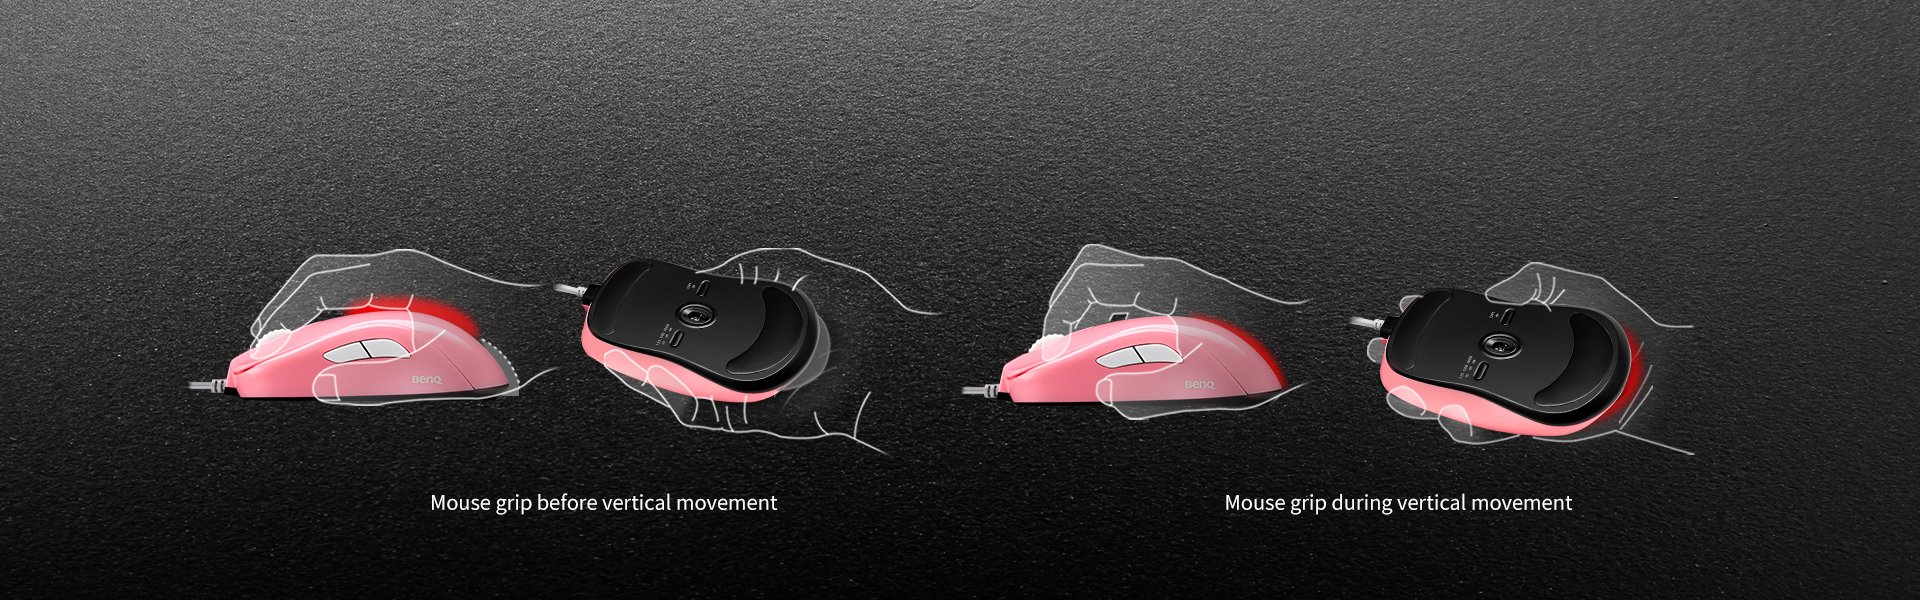 zowie-esports-gaming-mouse-s2-pink-vertical-movement